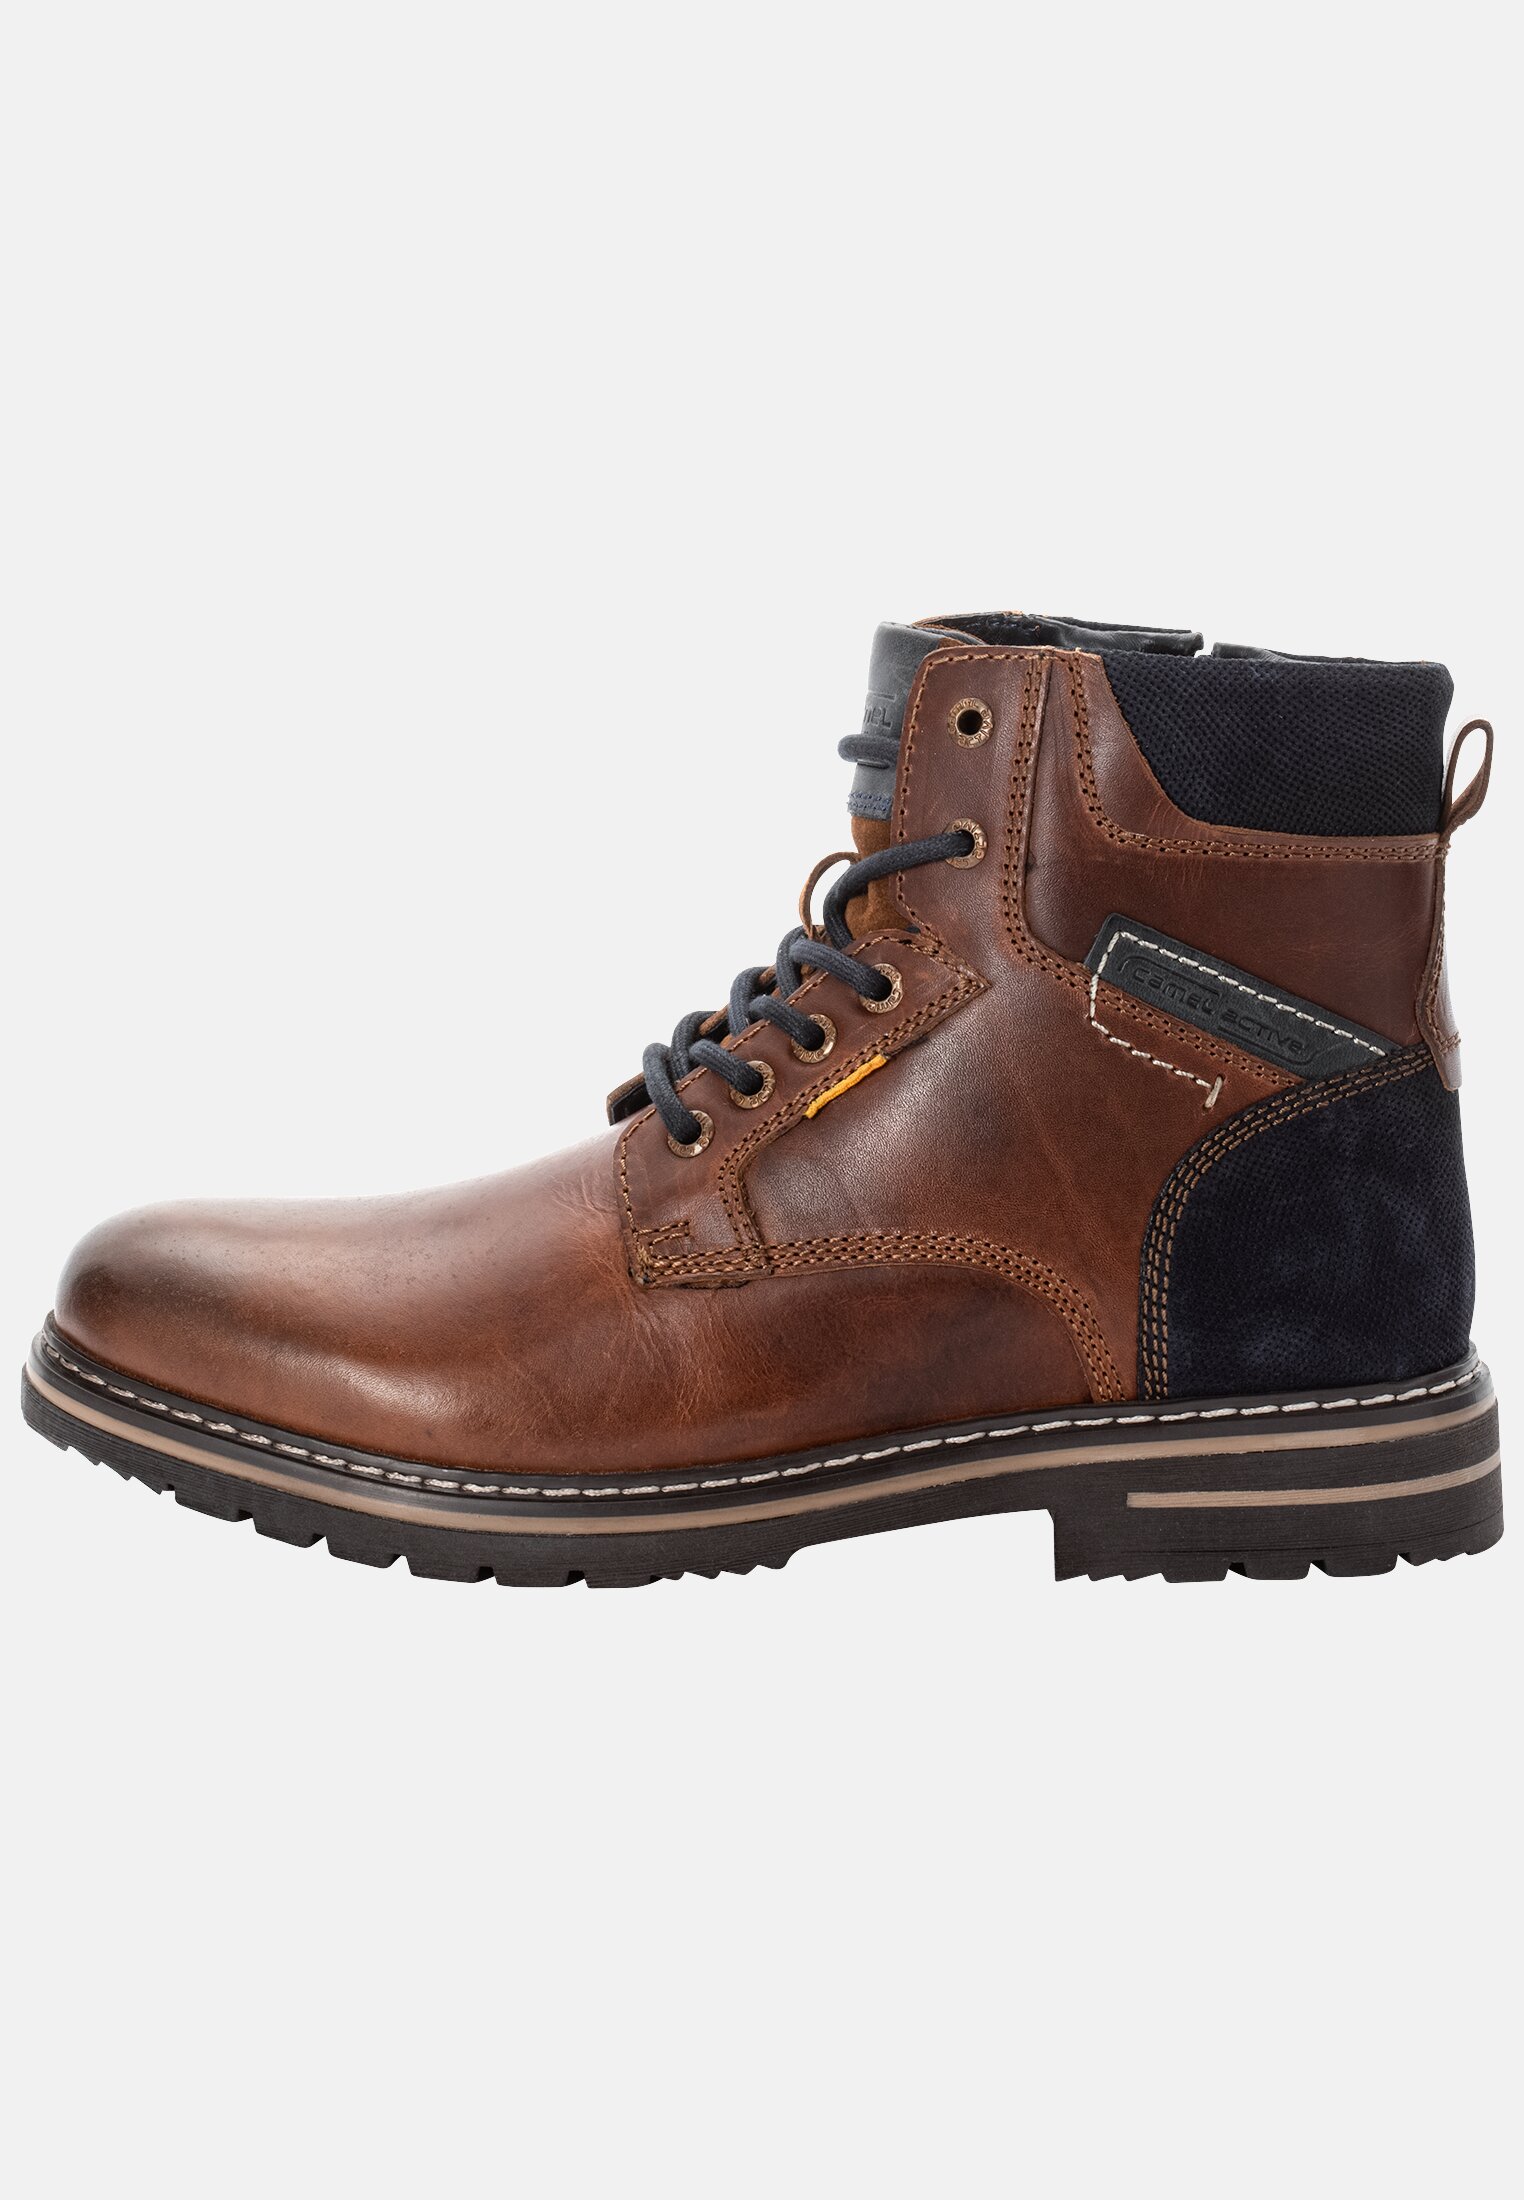 Camel Active Lace-up boot made from genius leather